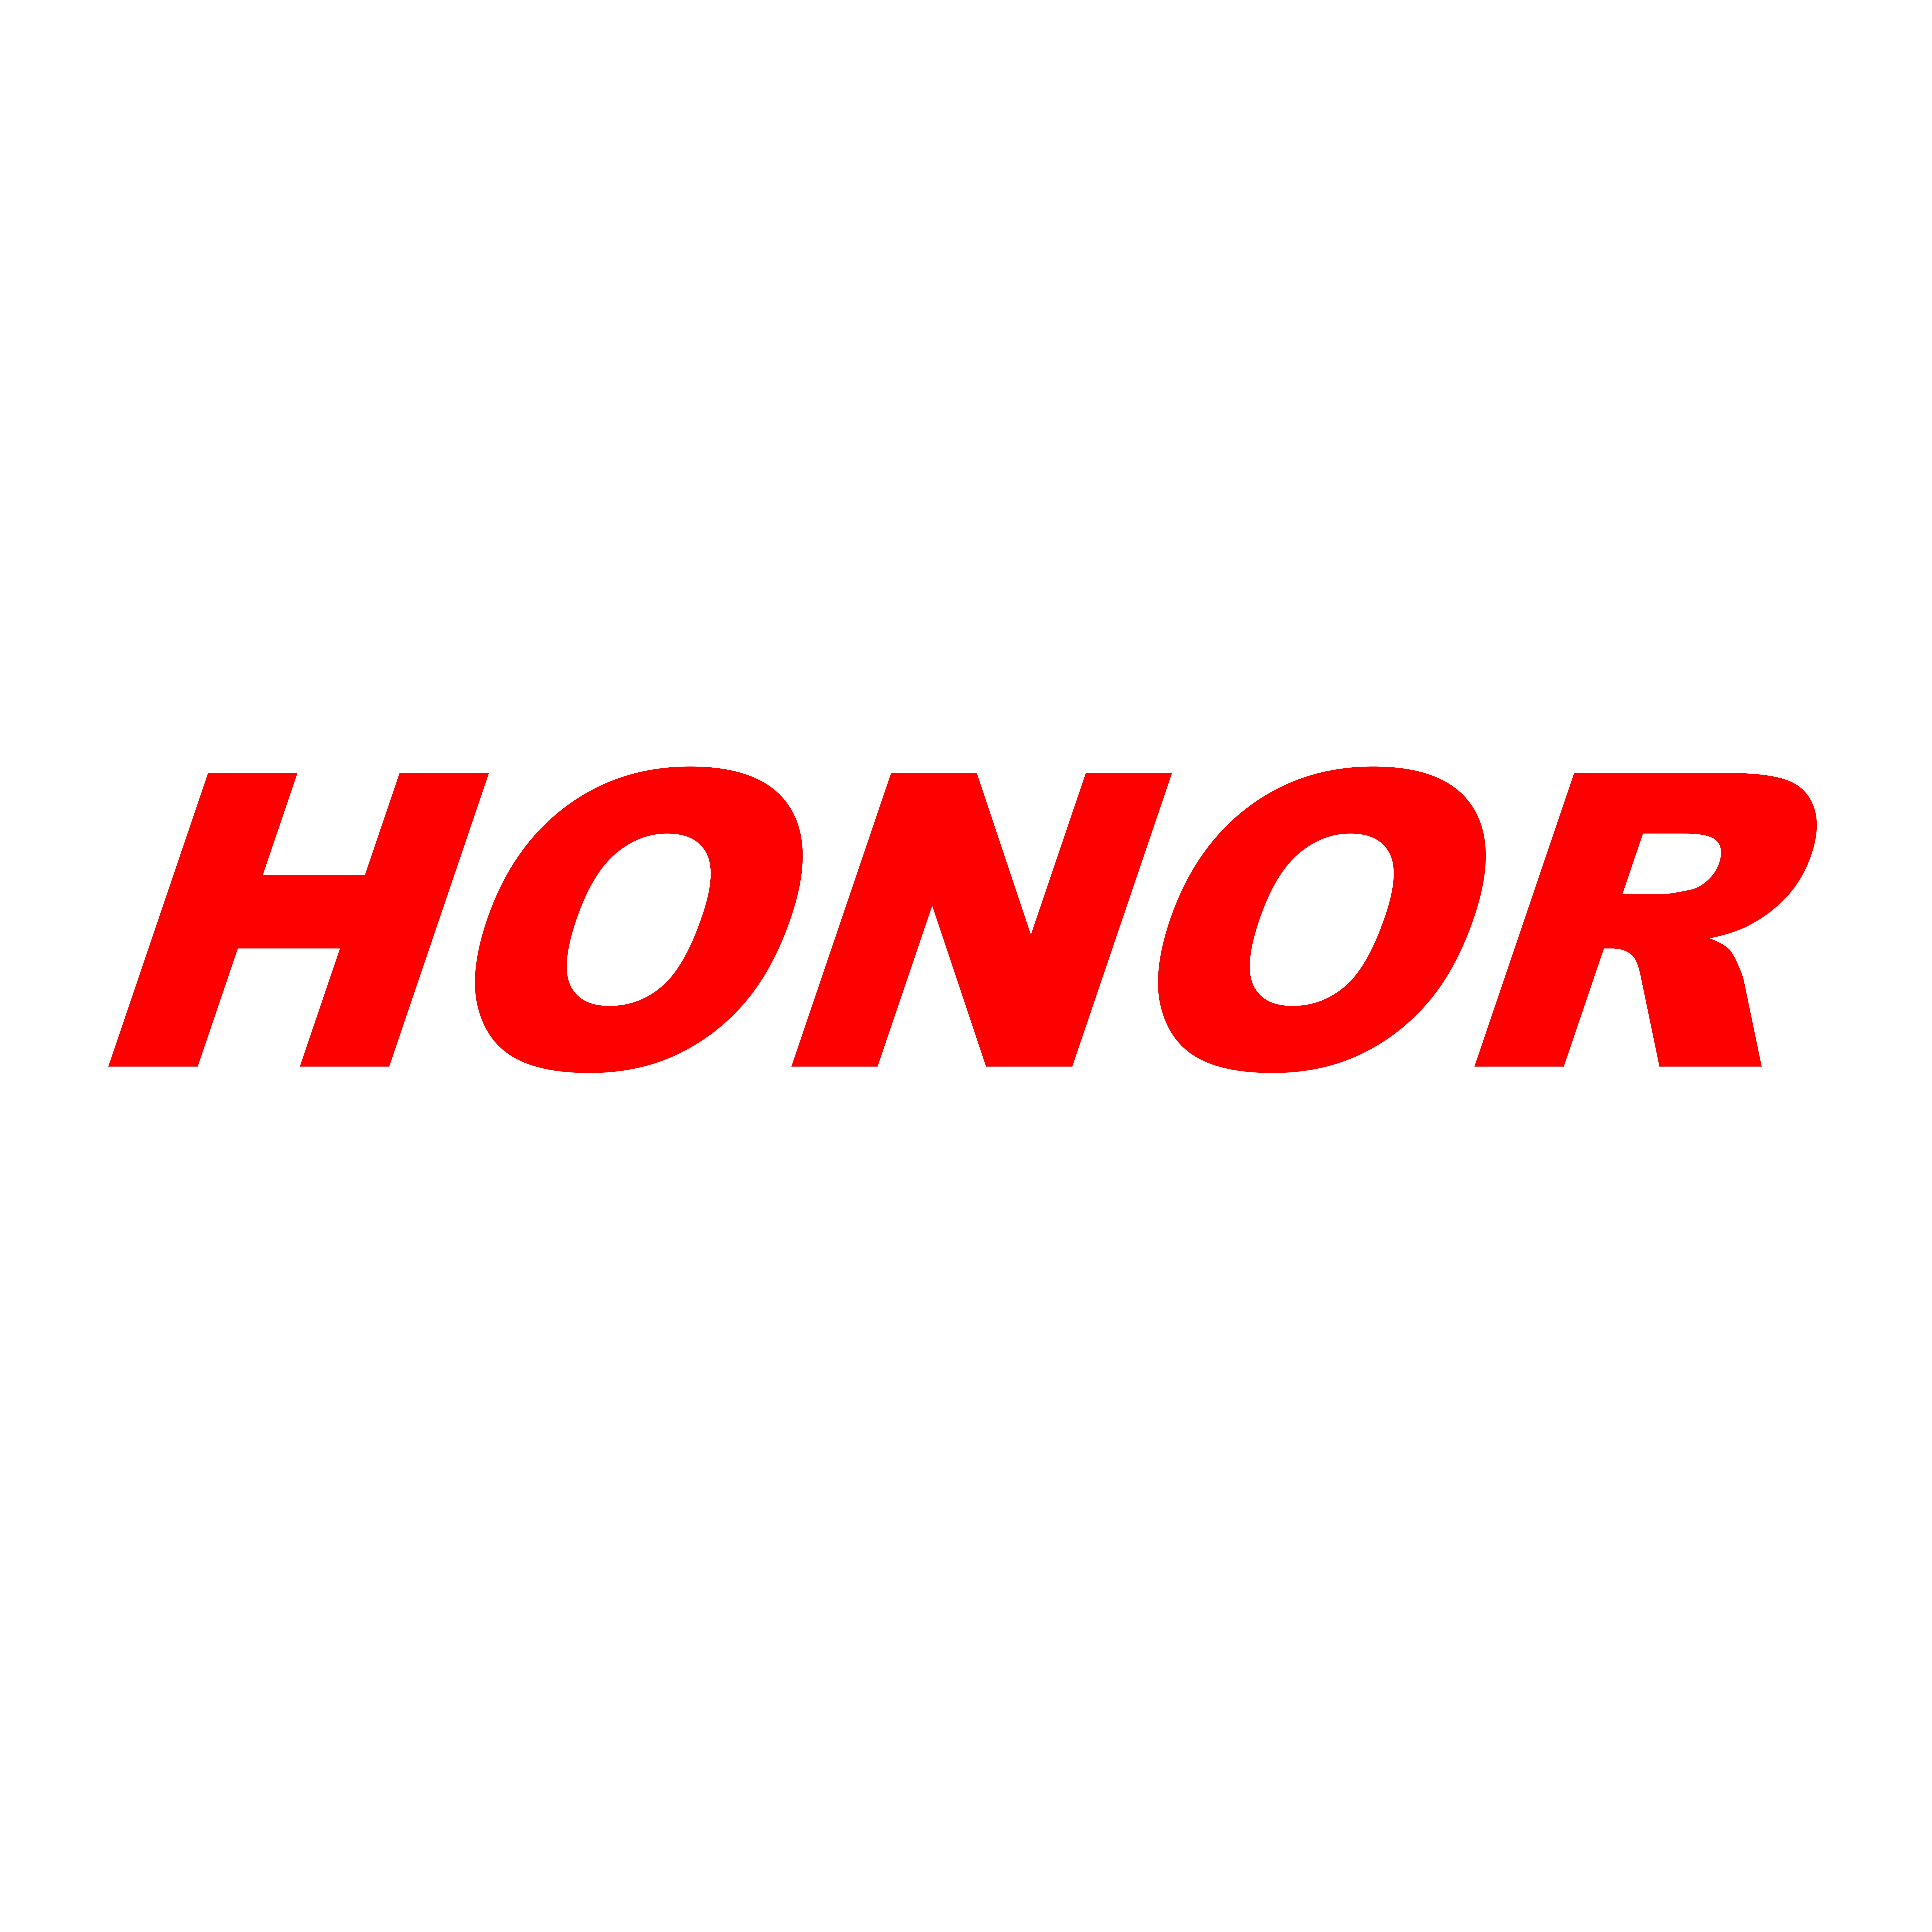 HONOR GEAR PUMPS CORP.